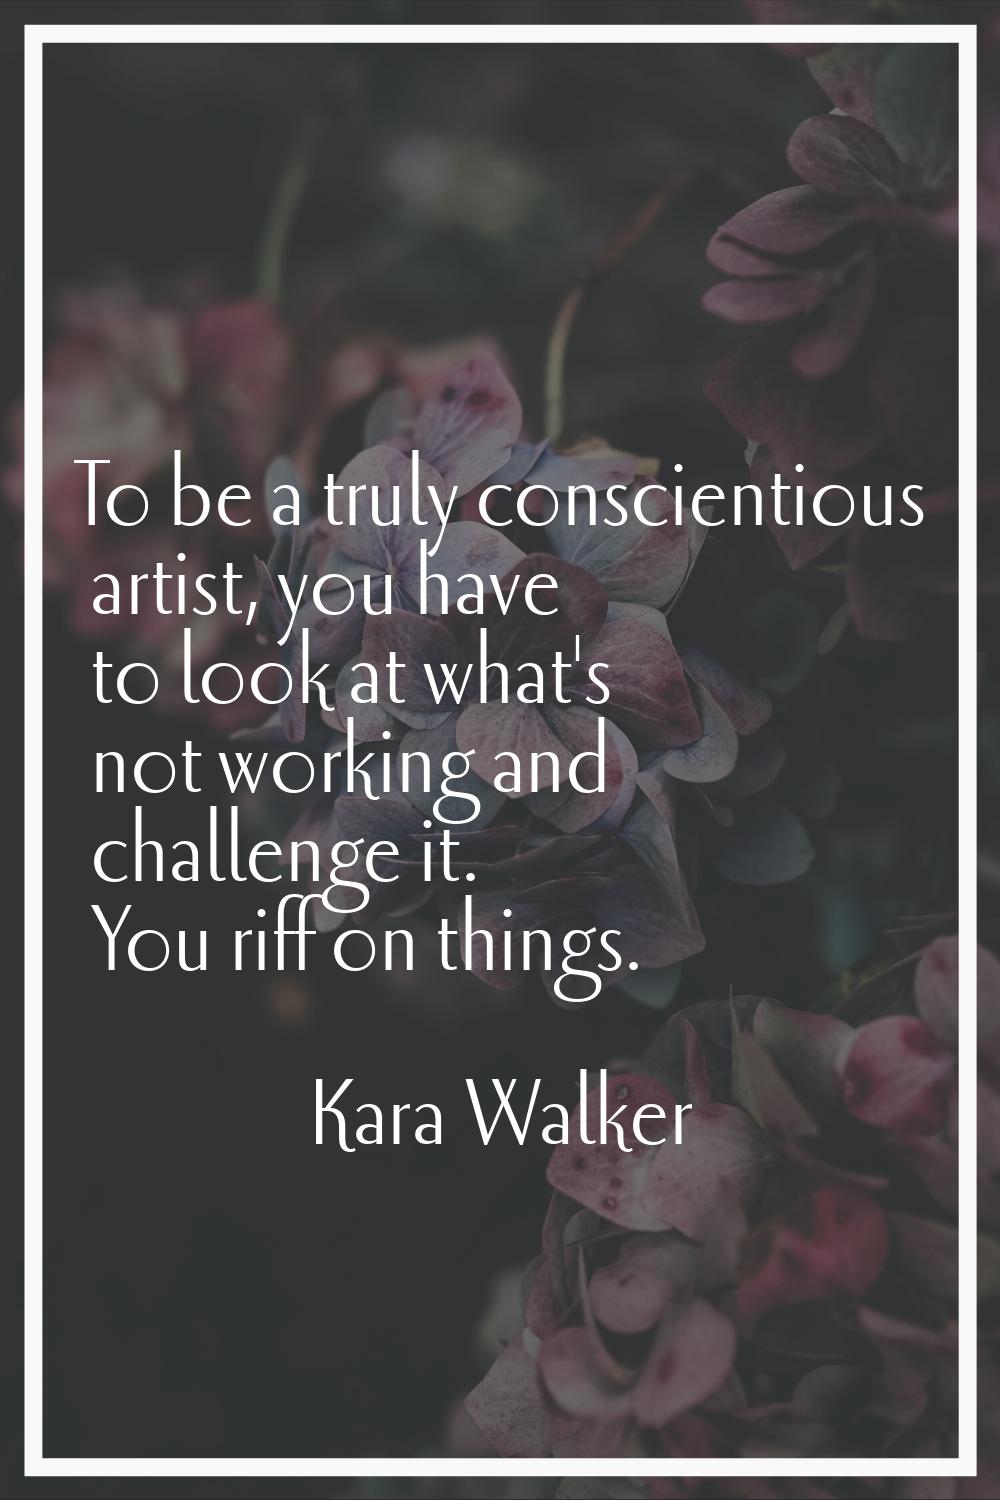 To be a truly conscientious artist, you have to look at what's not working and challenge it. You ri